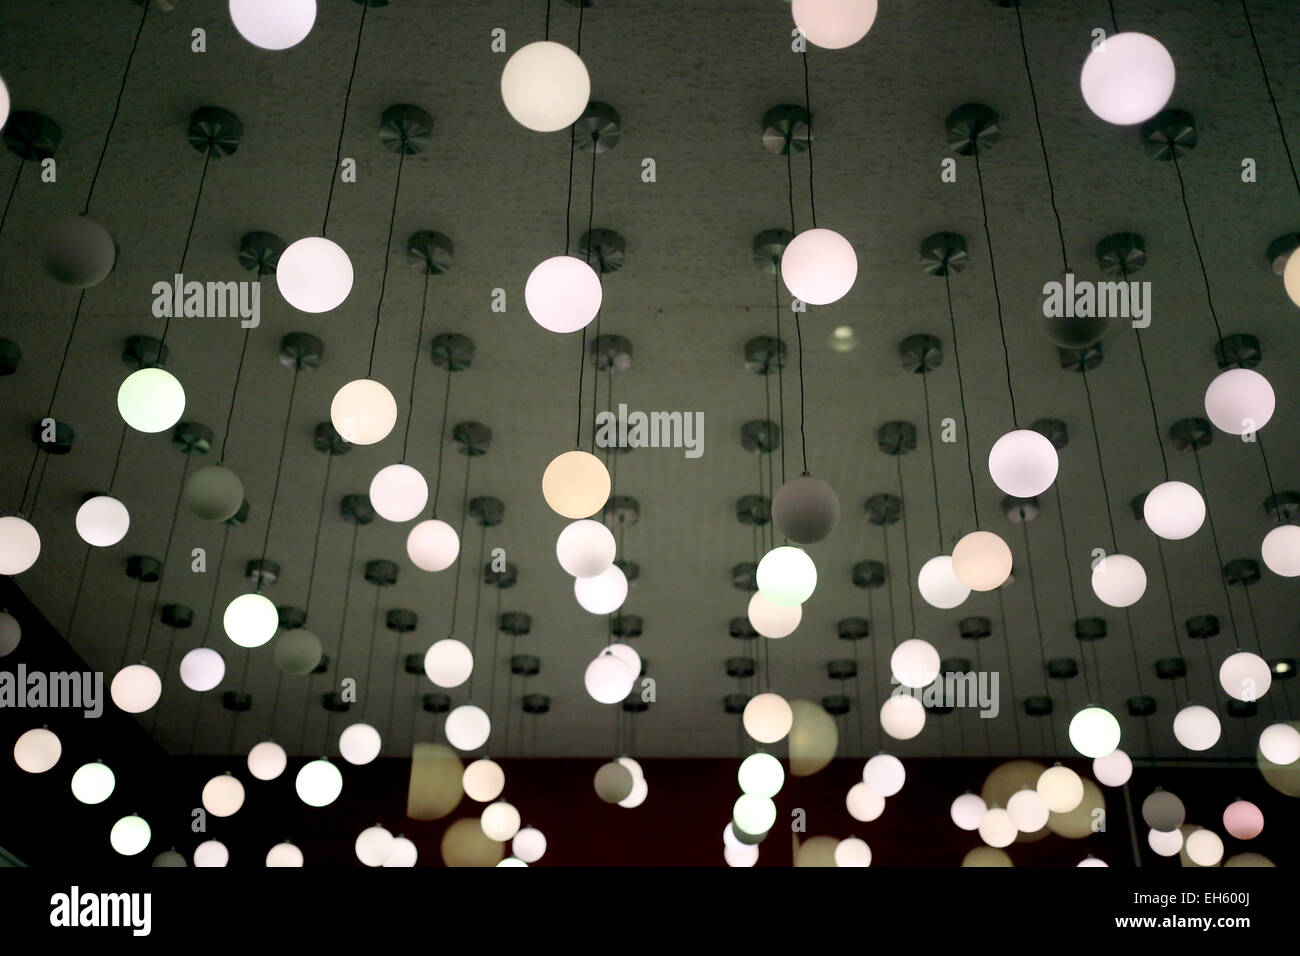 Lamps hanging on the ceiling for background. Stock Photo